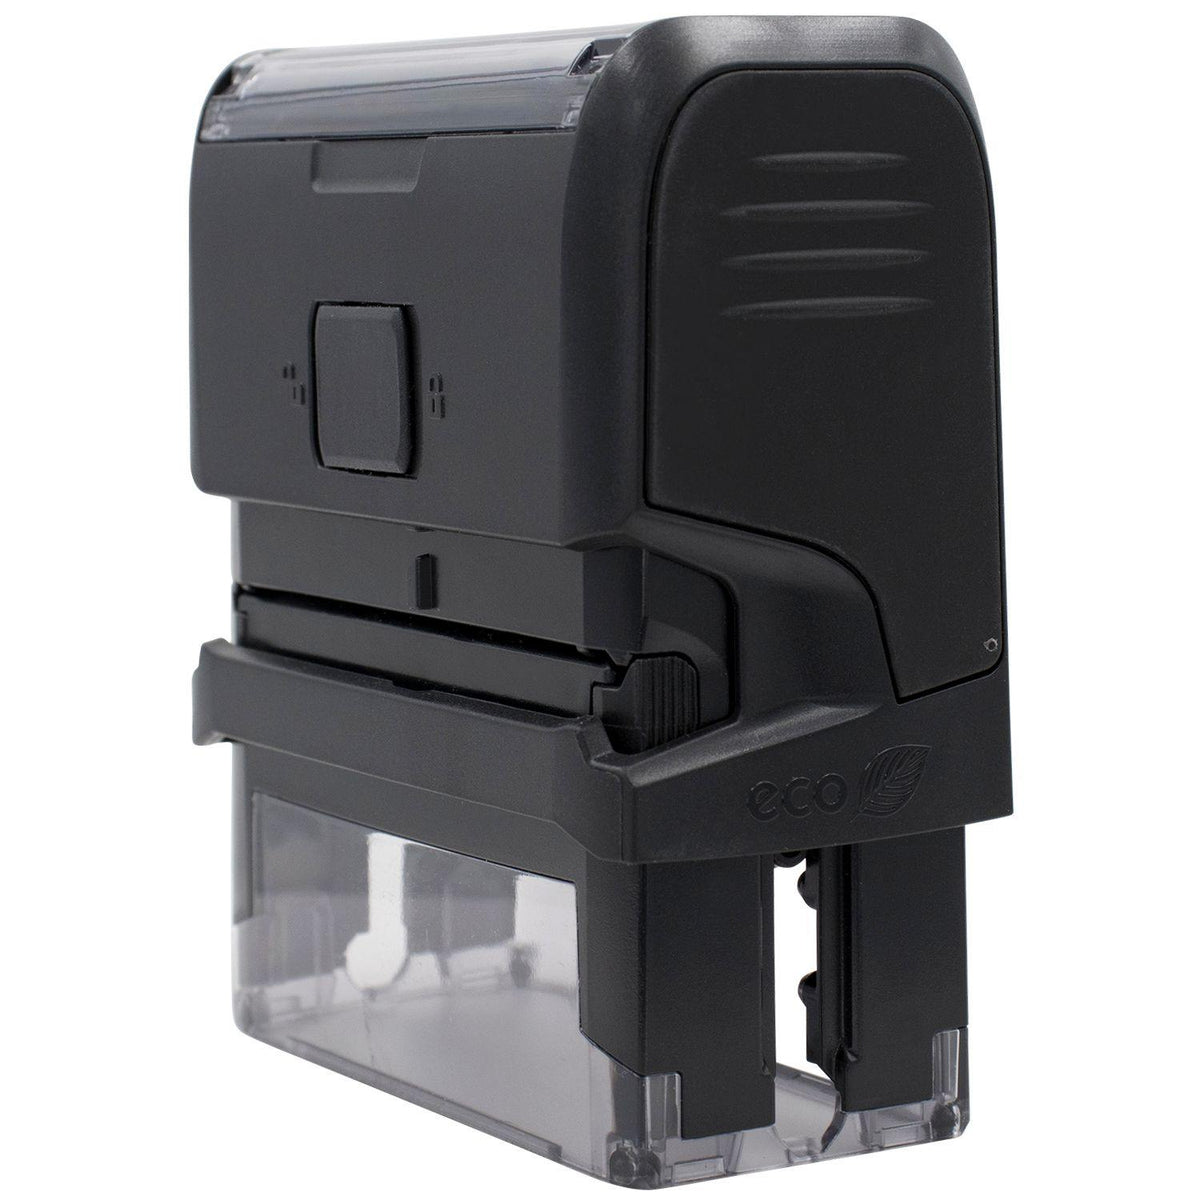 Large Self-Inking Narrow Font First Class Mail Stamp - Engineer Seal Stamps - Brand_Trodat, Impression Size_Large, Stamp Type_Self-Inking Stamp, Type of Use_Business, Type of Use_Postal &amp; Mailing, Type of Use_Professional